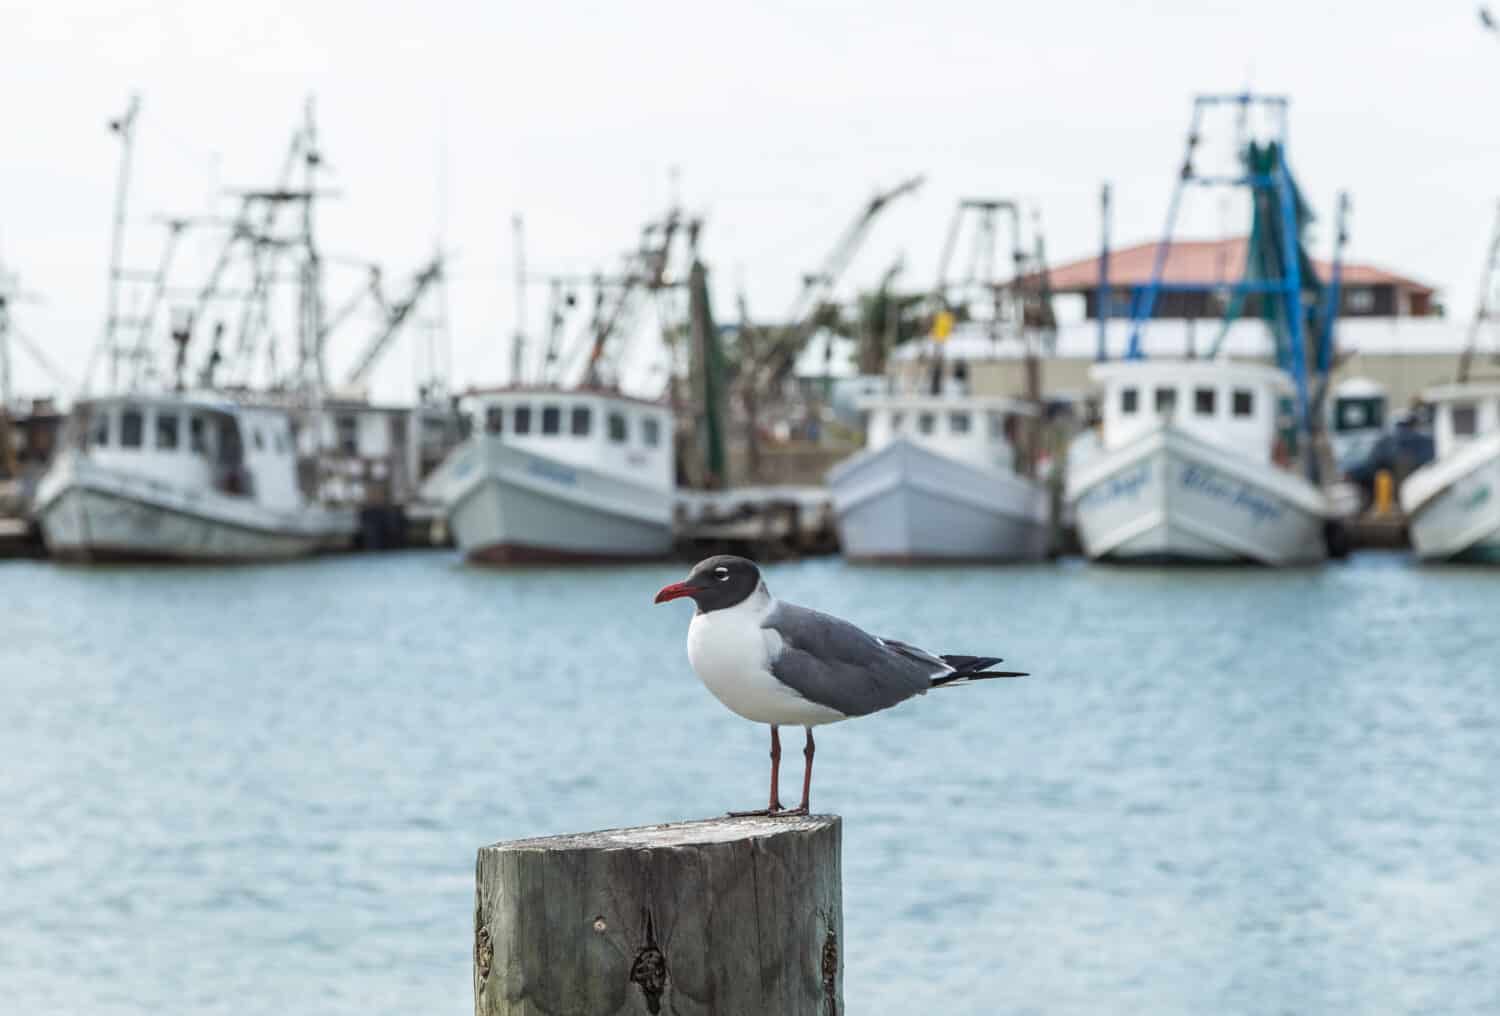 Laughing Gull (Leucophaeus atricilla) perched on post with Fulton Texas fishing fleet in background. Horizontal format